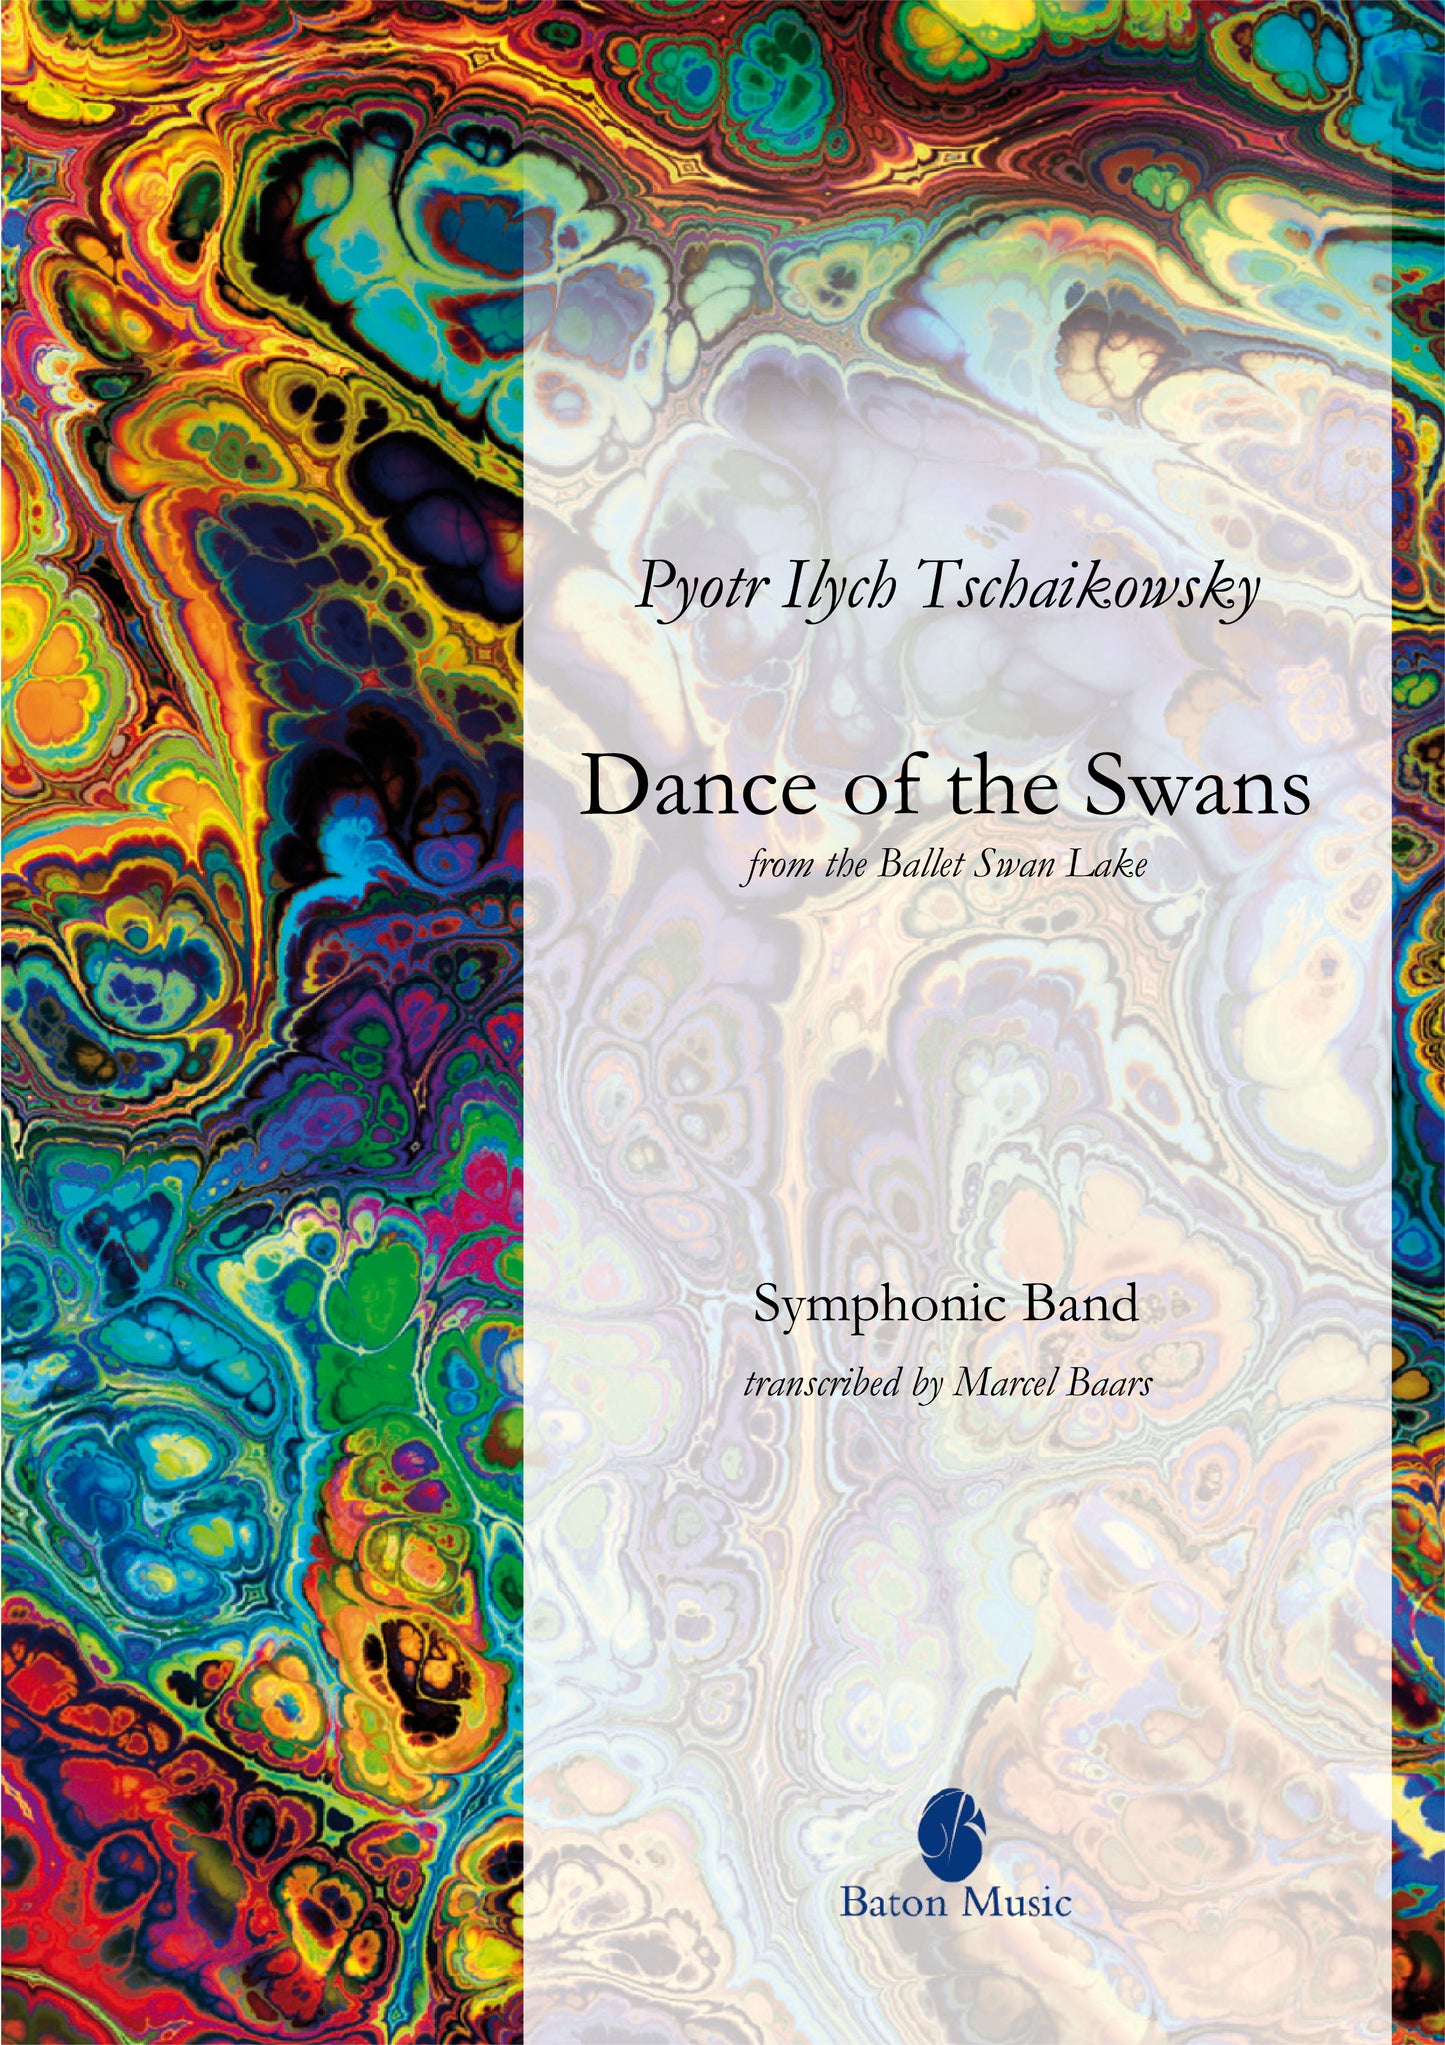 Dance of the Swans (Swan Lake) - Tchaikowsky